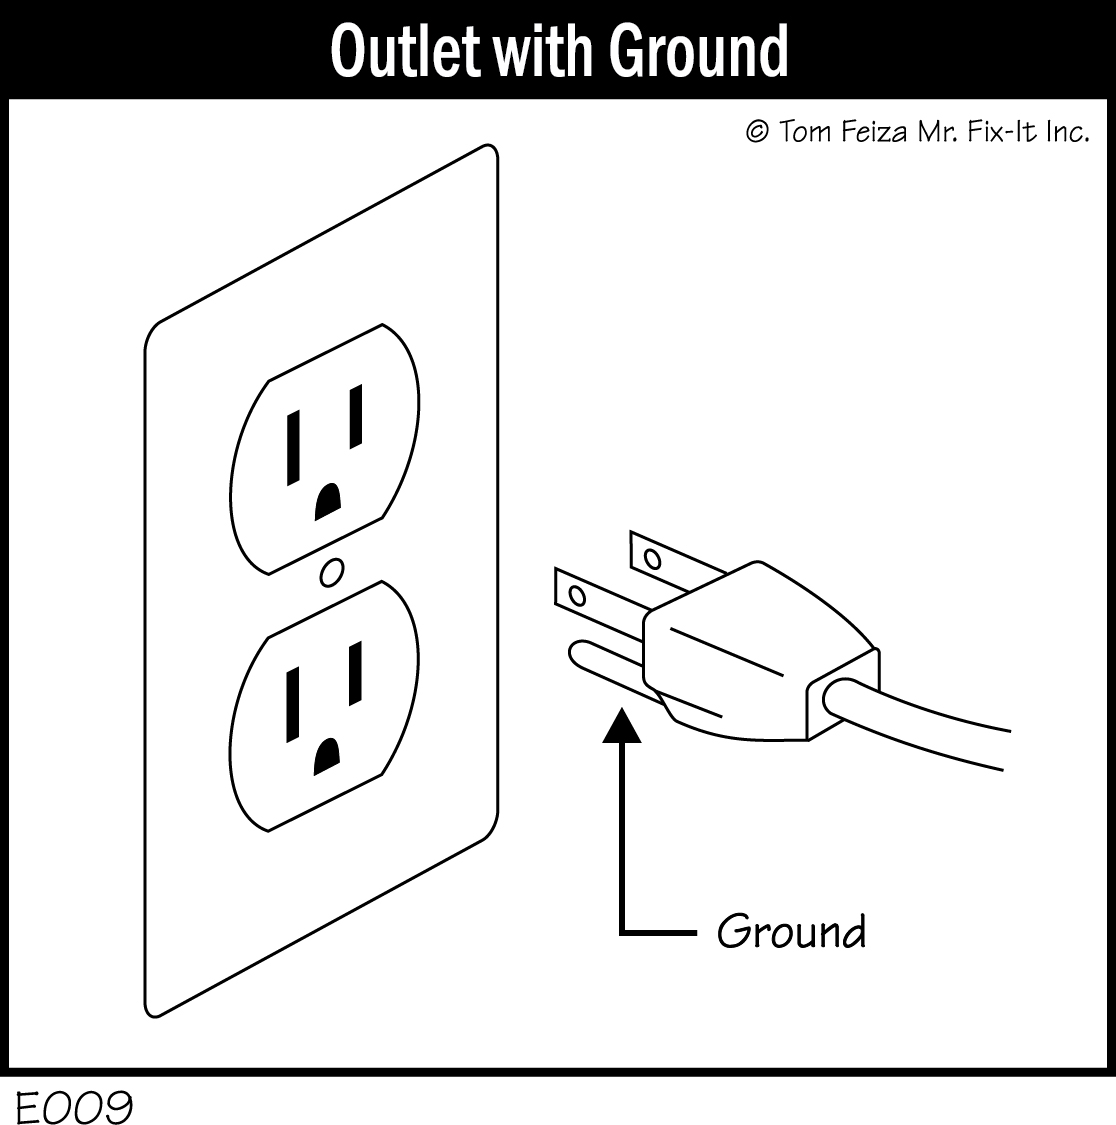 E009 - Outlet with Ground